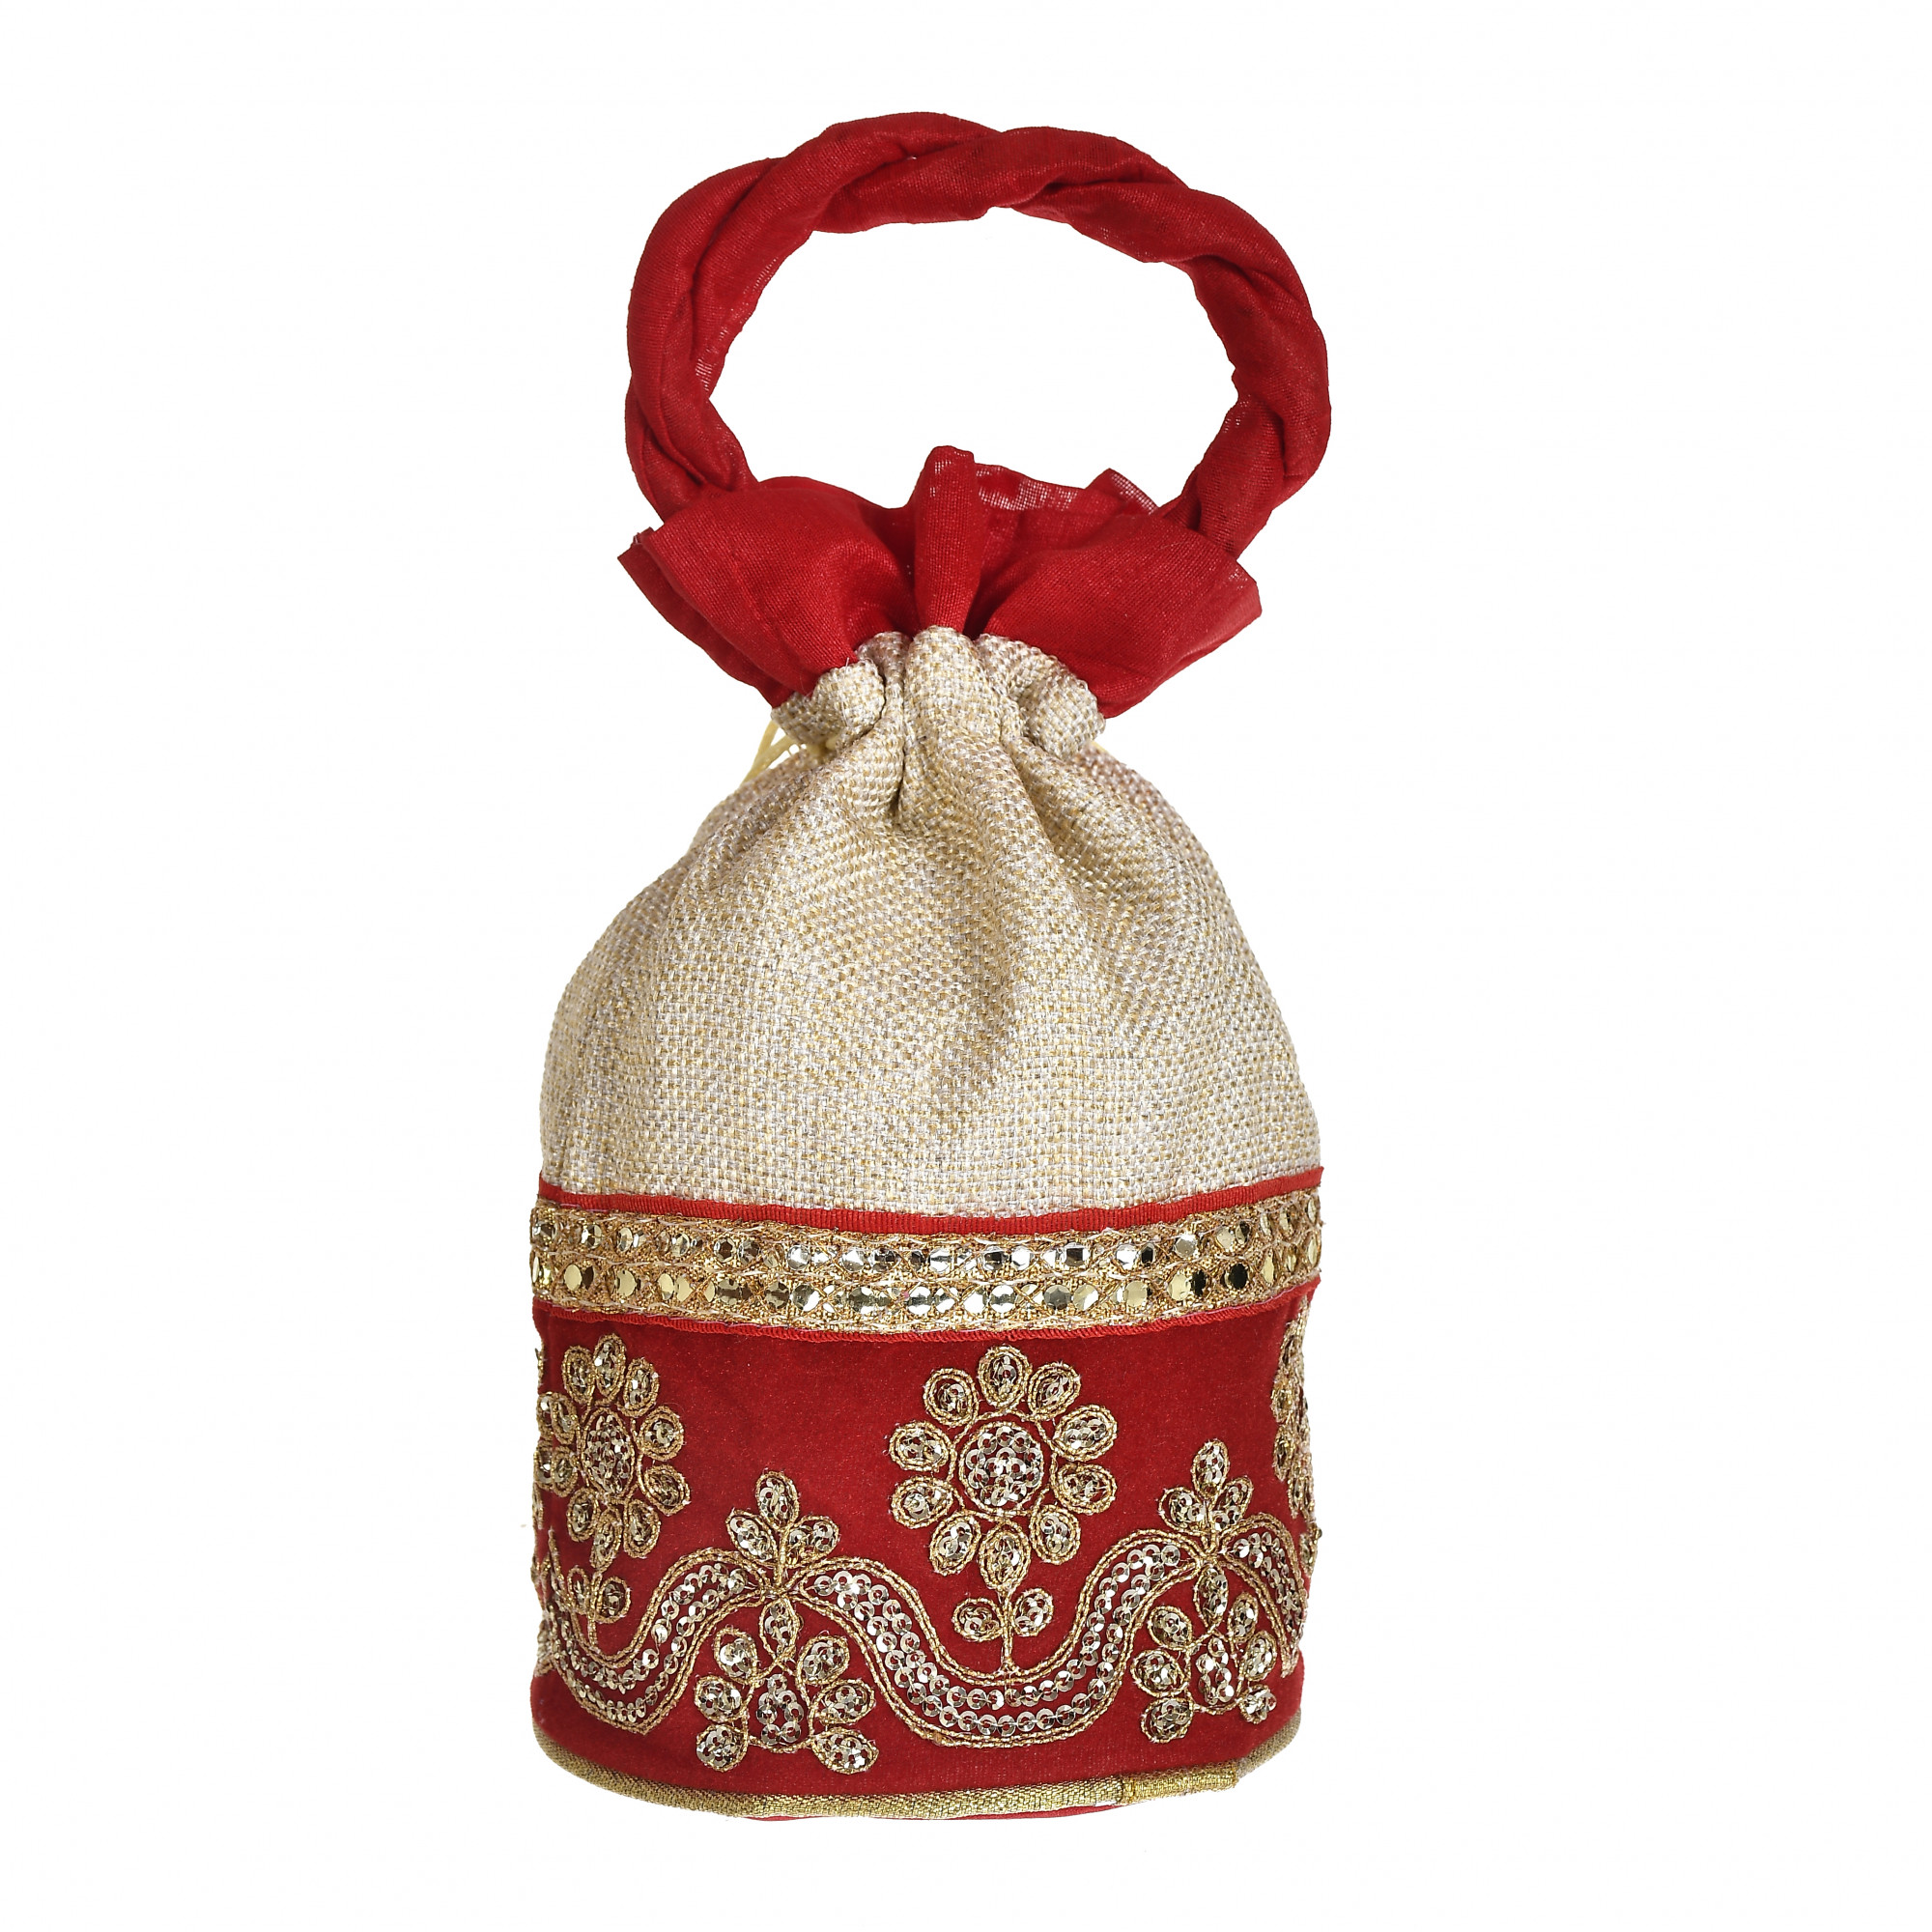 Kuber Industries Embroidered Design Drawstring Potli Bag Party Wedding Favor Gift Jewelry Bags-(Red & Maroon)